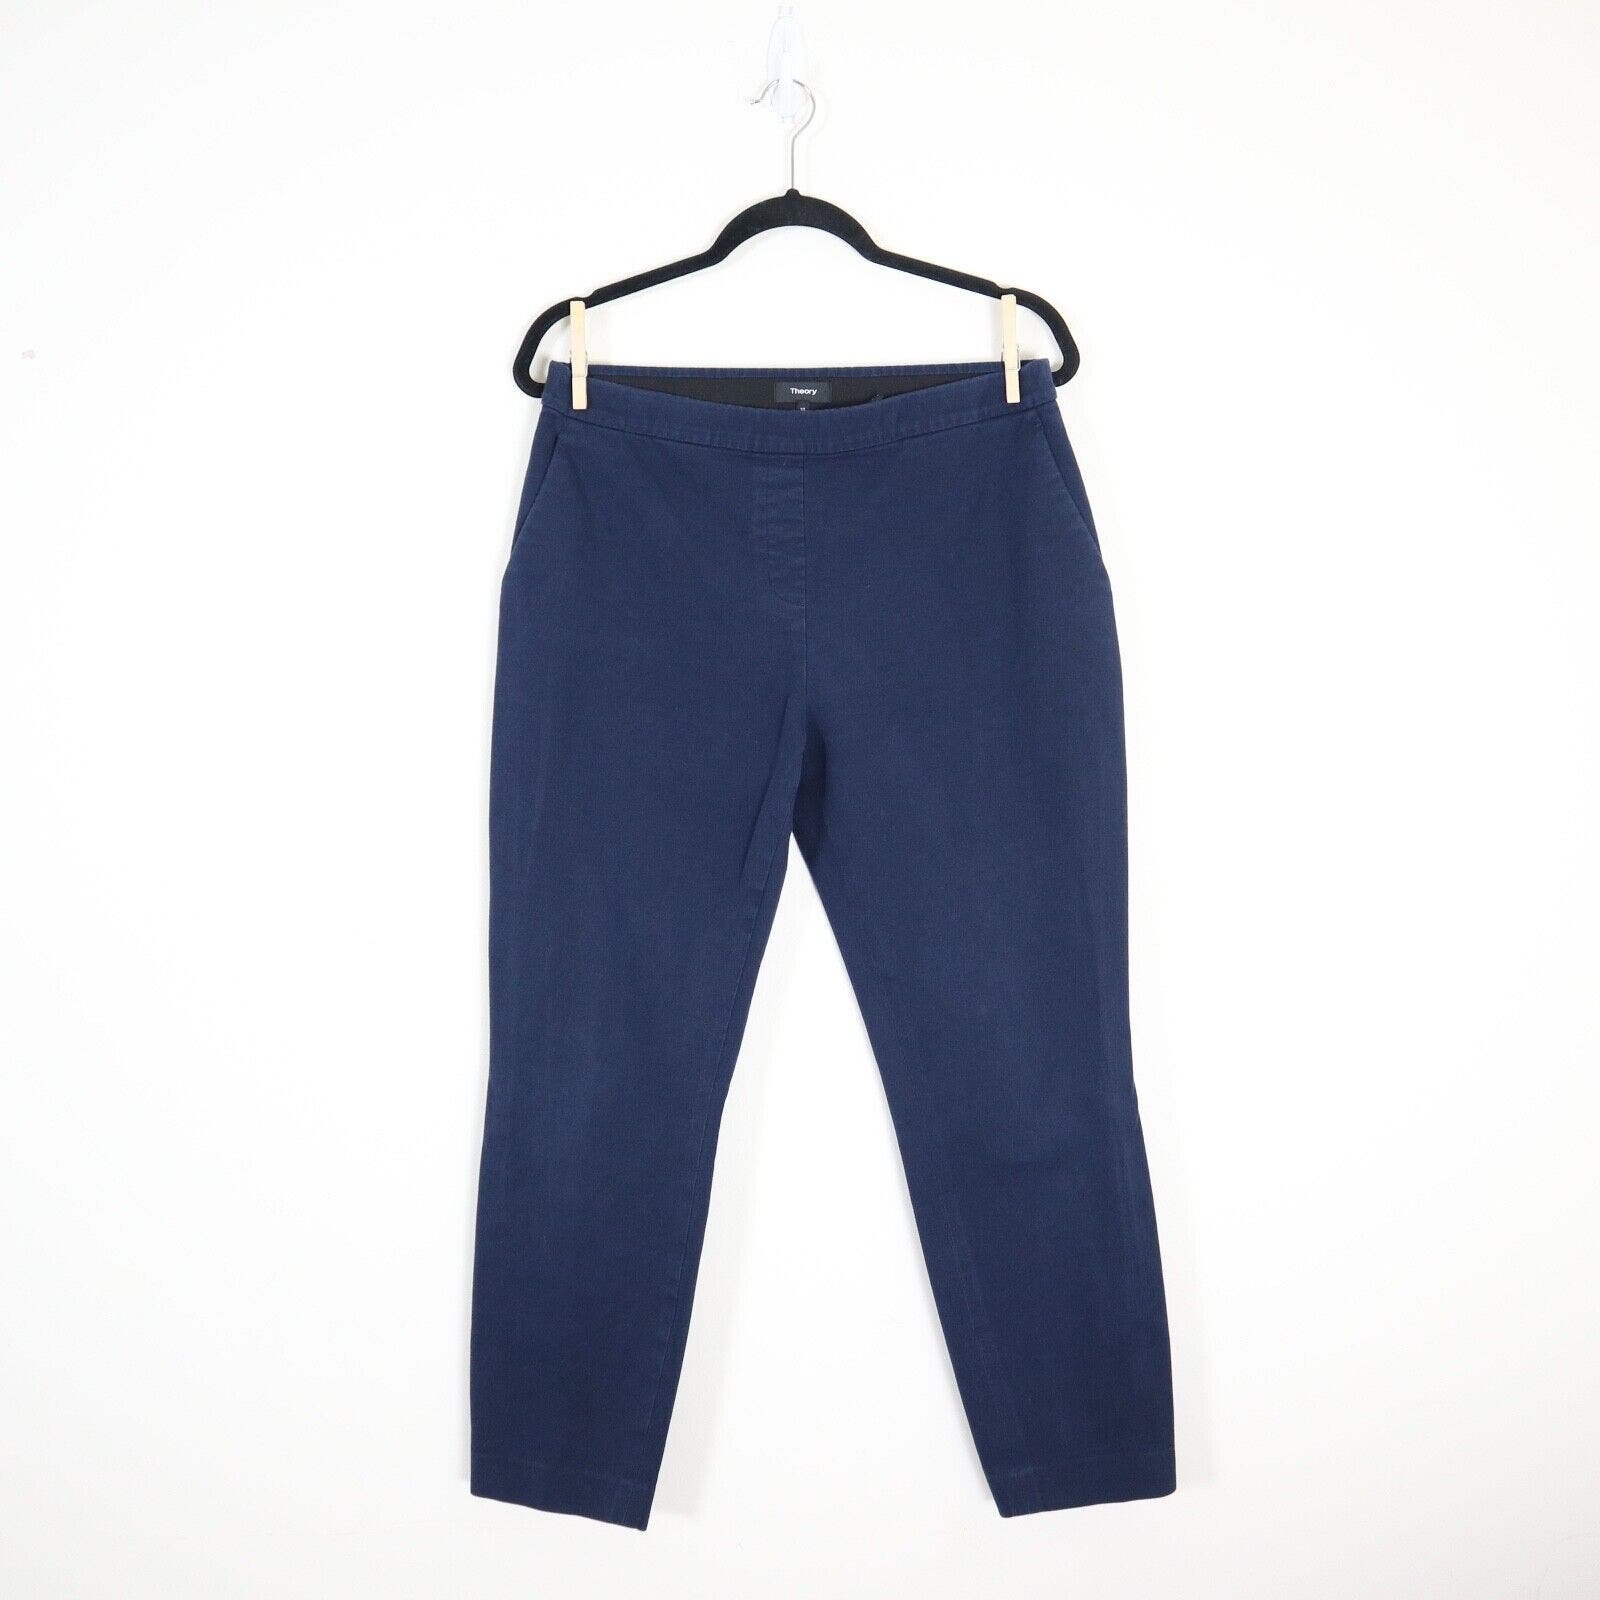 Affordable Theory Size 10 Thaniel Cotton Bistretch Pant Slim Ankle Pull On Pants Blue ocKaCbKU5 Counter Genuine 